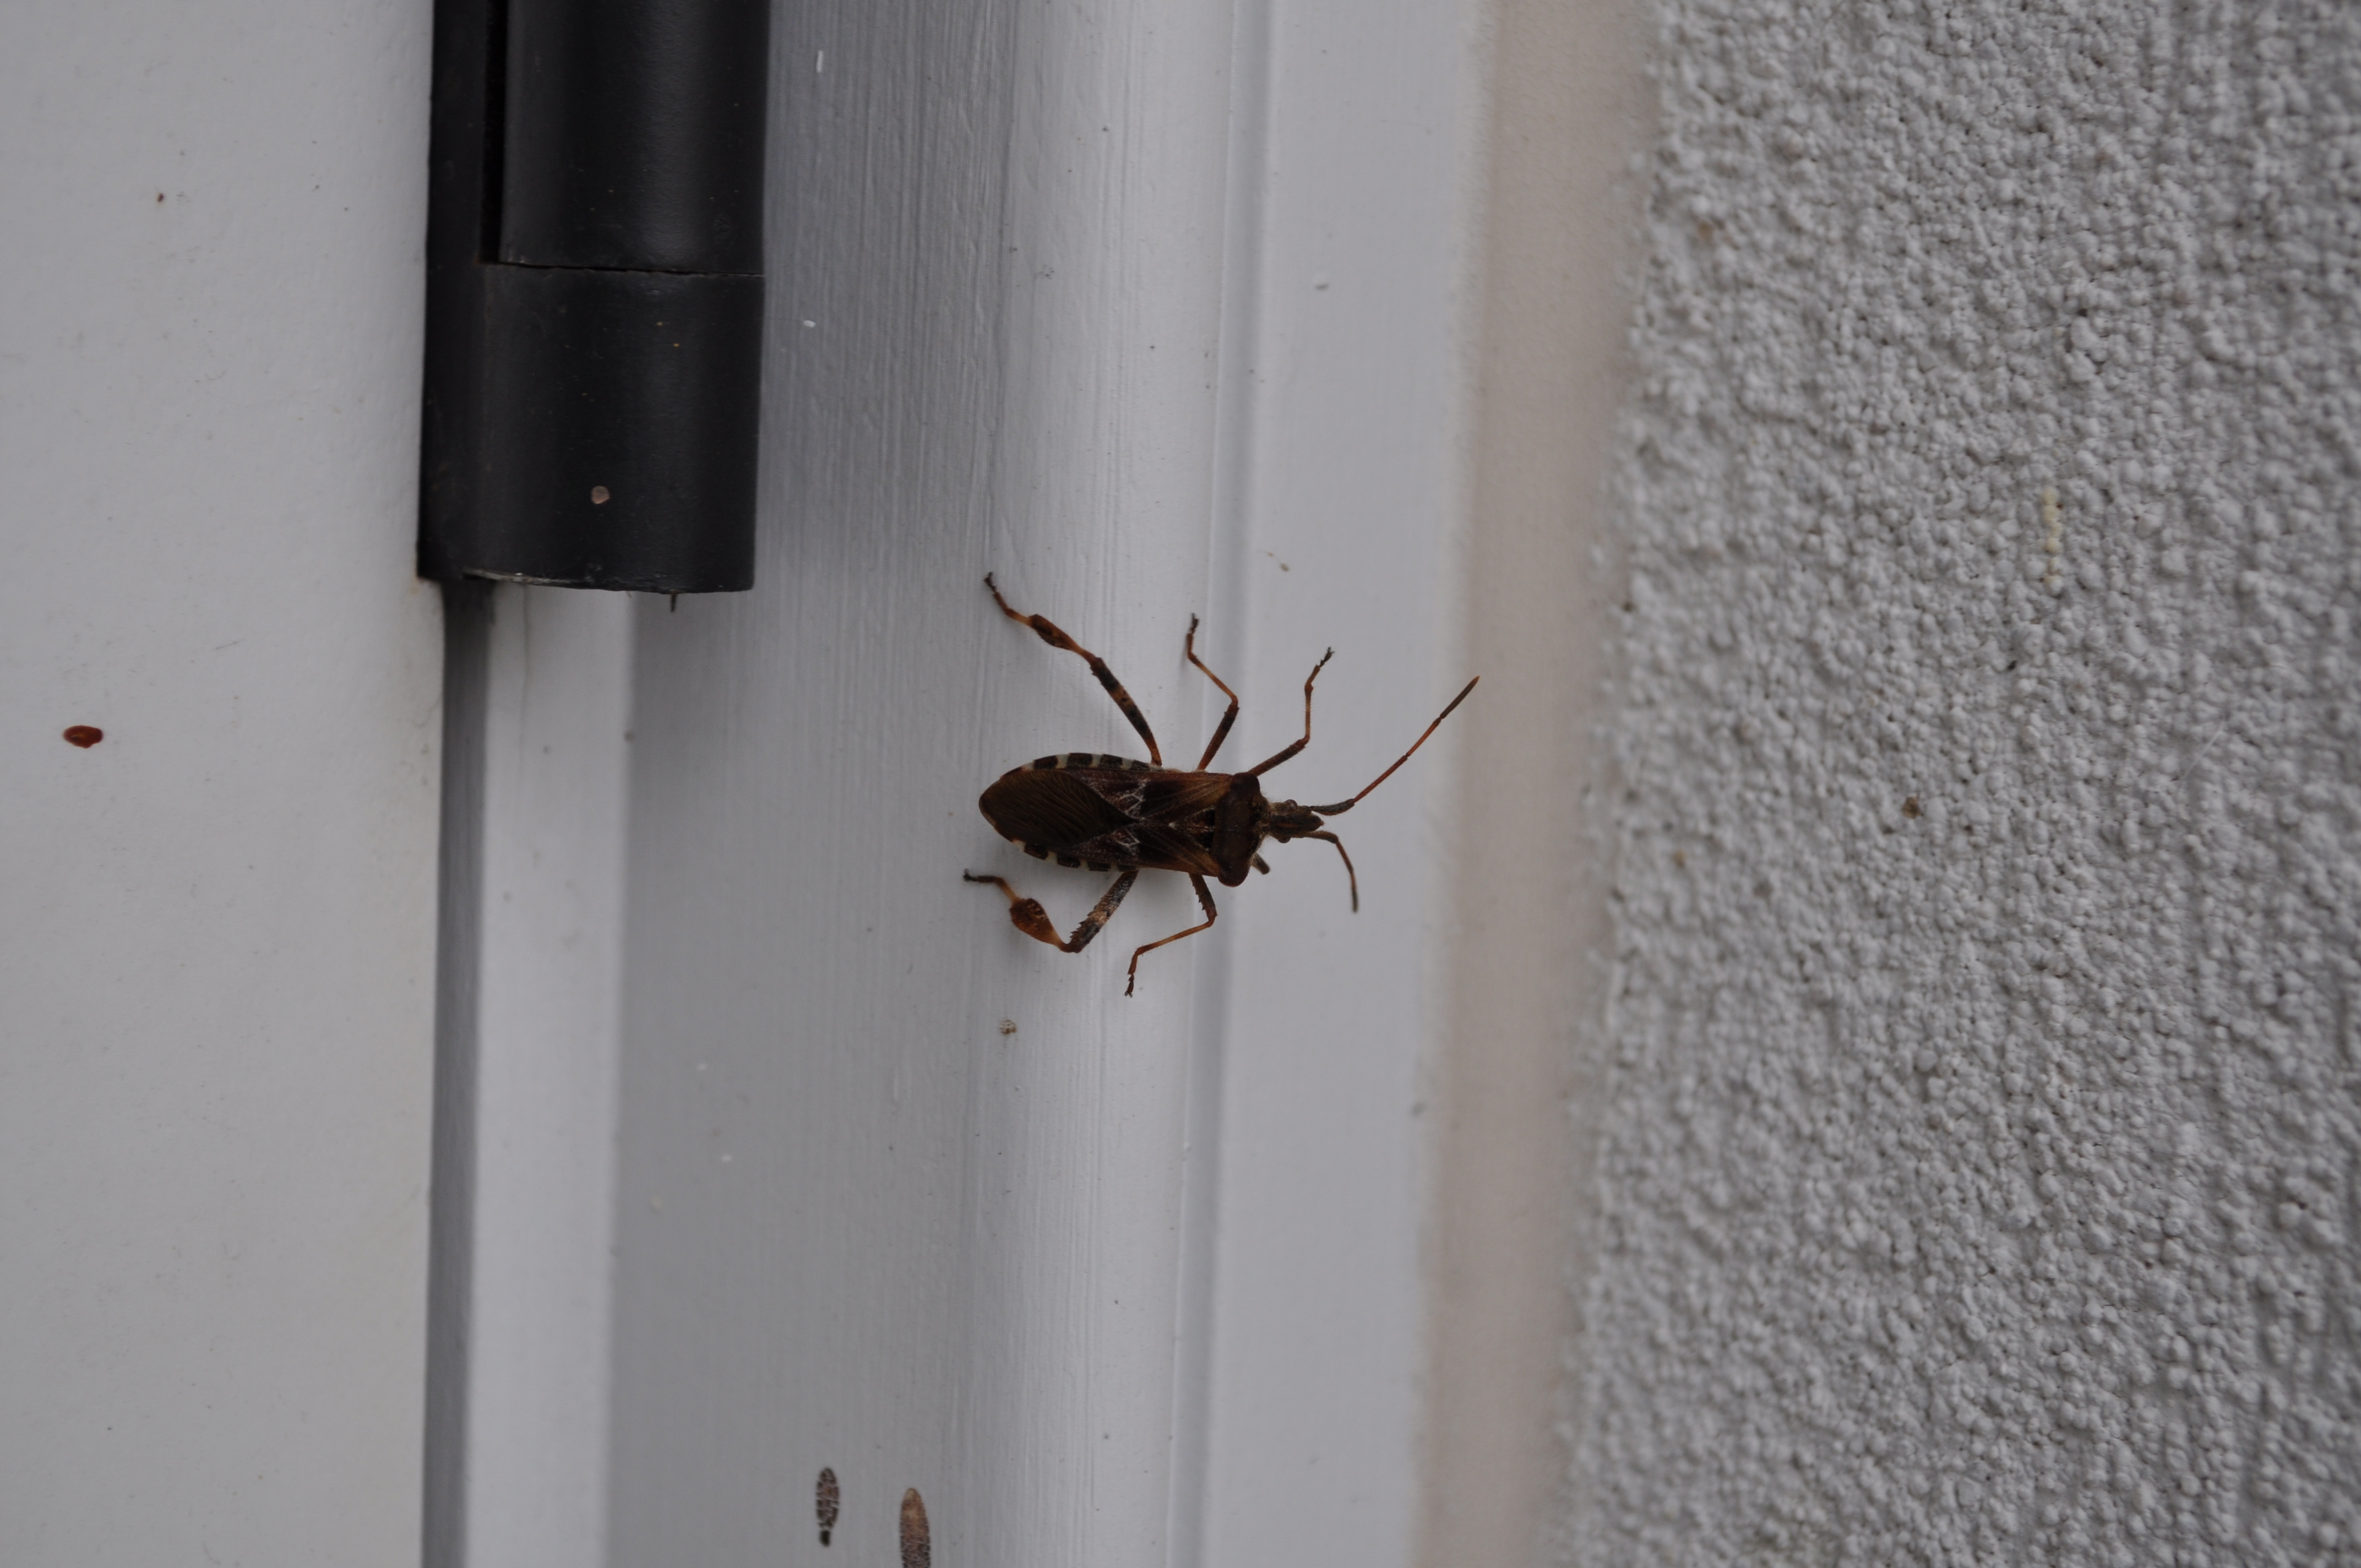 Spotted near a gap in a doorjamb, this western conifer seed bug shows a characteristic ‘paddle’ on its rear legs that are not present on the rounder marmorated stink bug. ANDREW MESSINGER